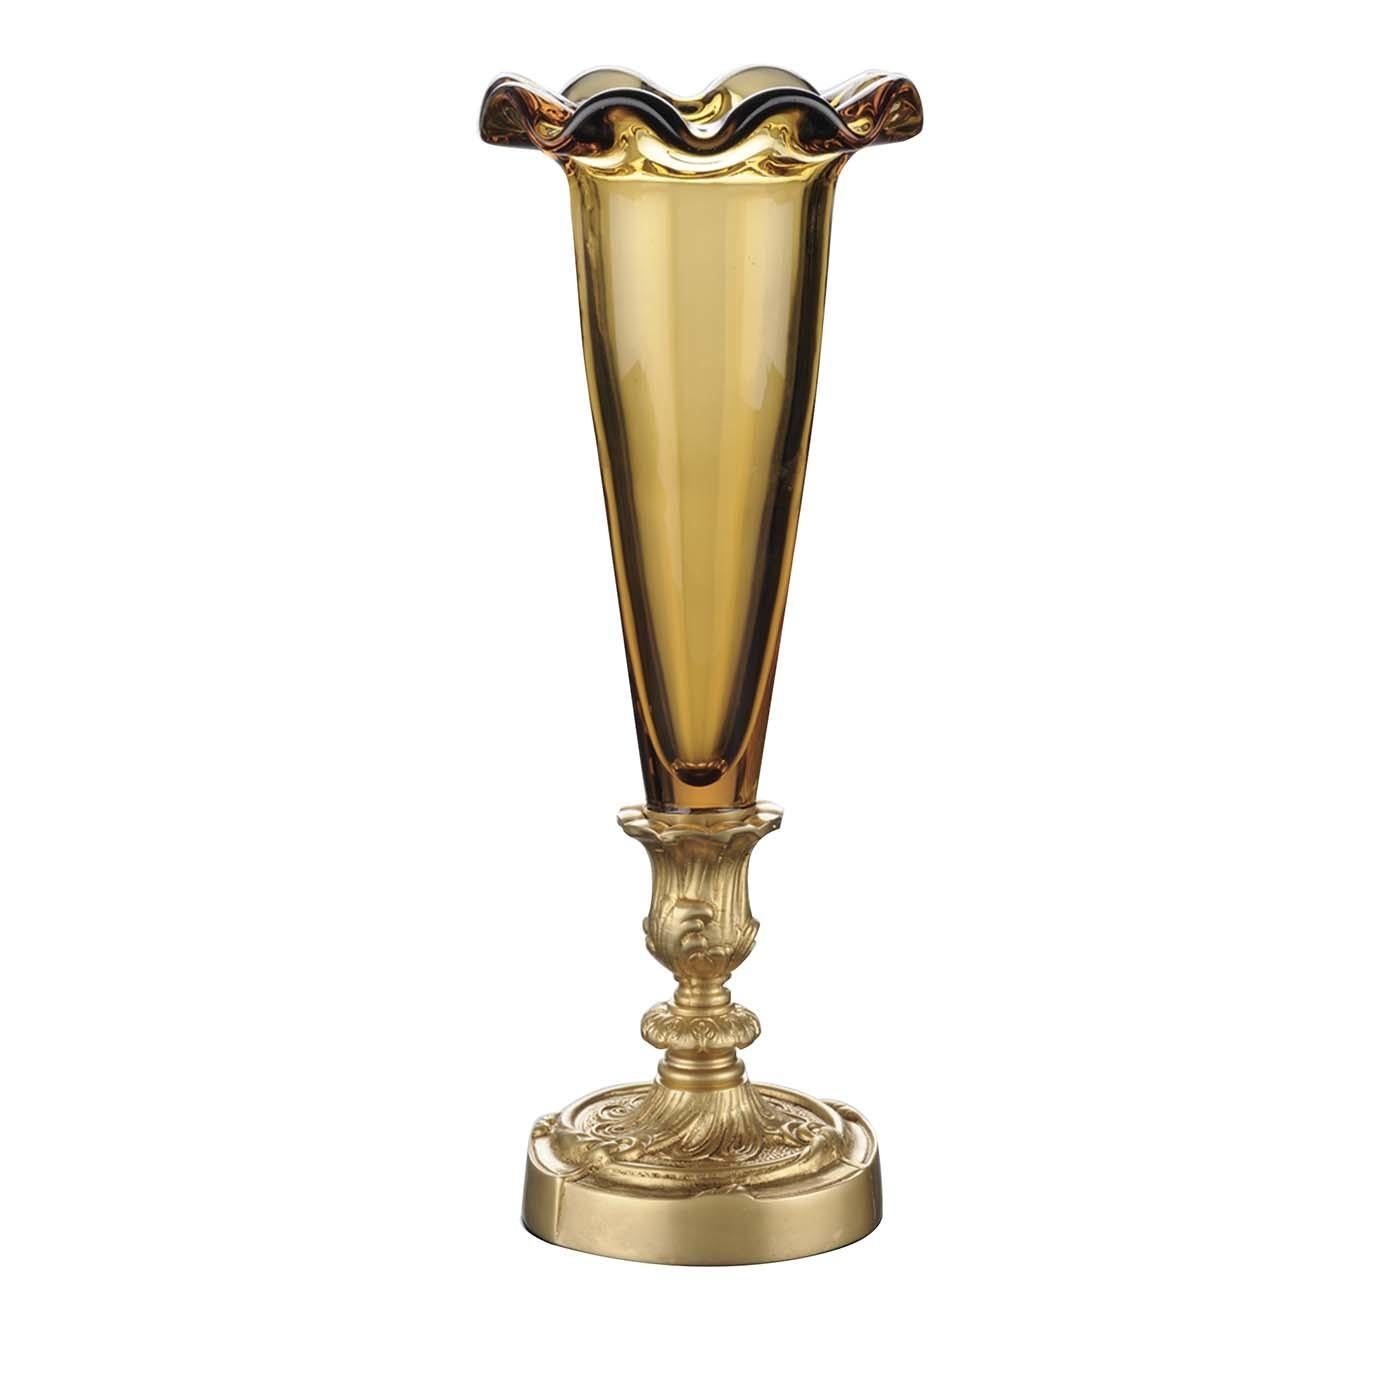 This exquisite vase is crafted of polished PbO 24% crystal with a delicate amber shade that elegantly complements the base in satin gold-finished bronze. The use of noble materials and the superb craftsmanship, mixed with a classically inspired